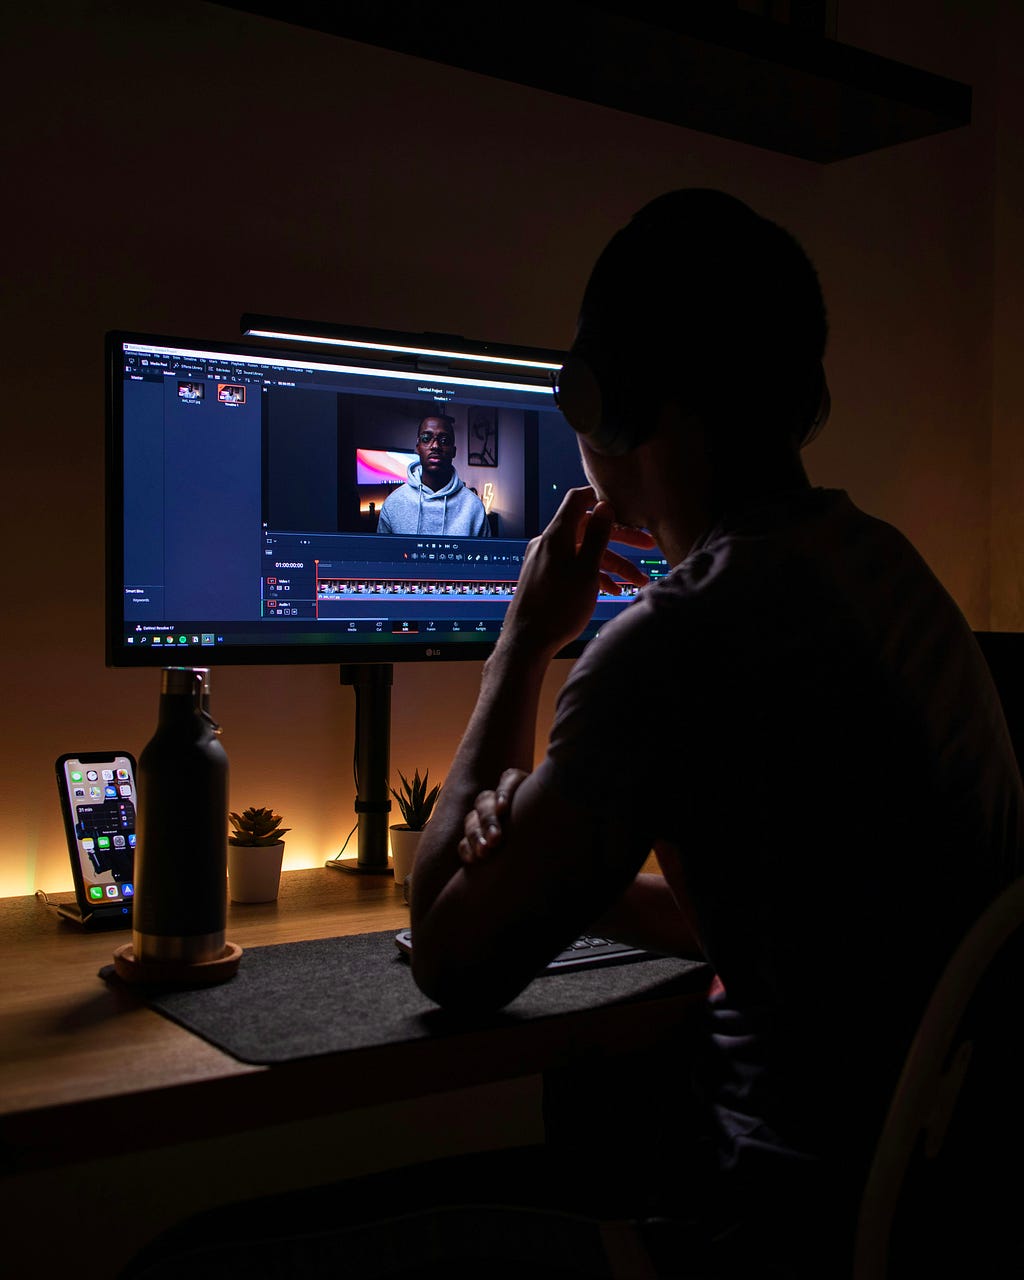 A Youtuber seated infront of a computer monitor editing a YouTube video